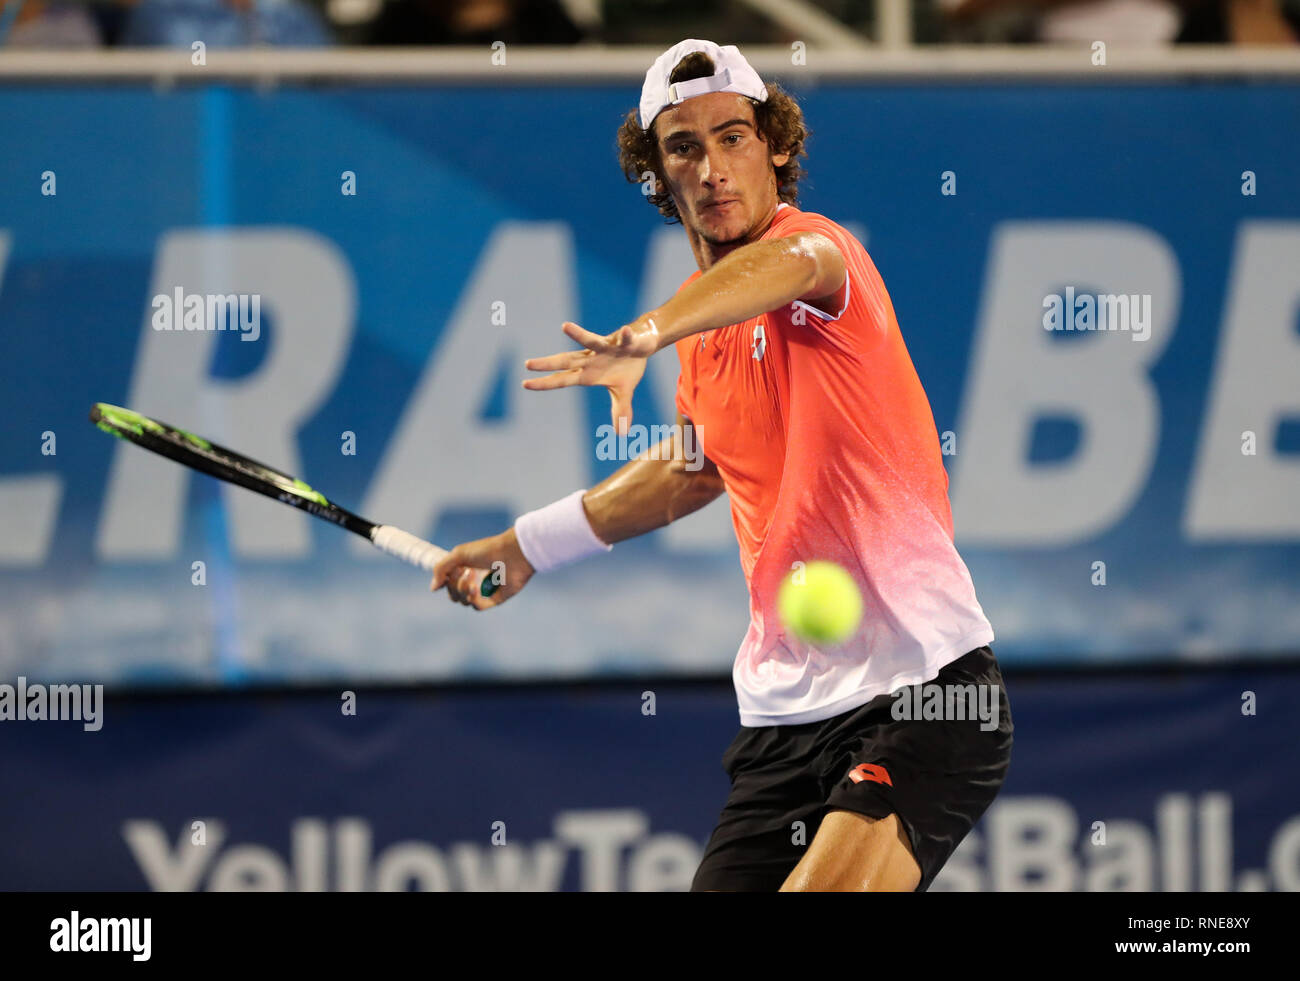 Delray Beach, Florida, USA. 18th Feb, 2019. Lloyd Harris, of South Africa  plays a forehand to Darian King, of Barbados, during the first round at the  2019 Delray Beach Open ATP professional